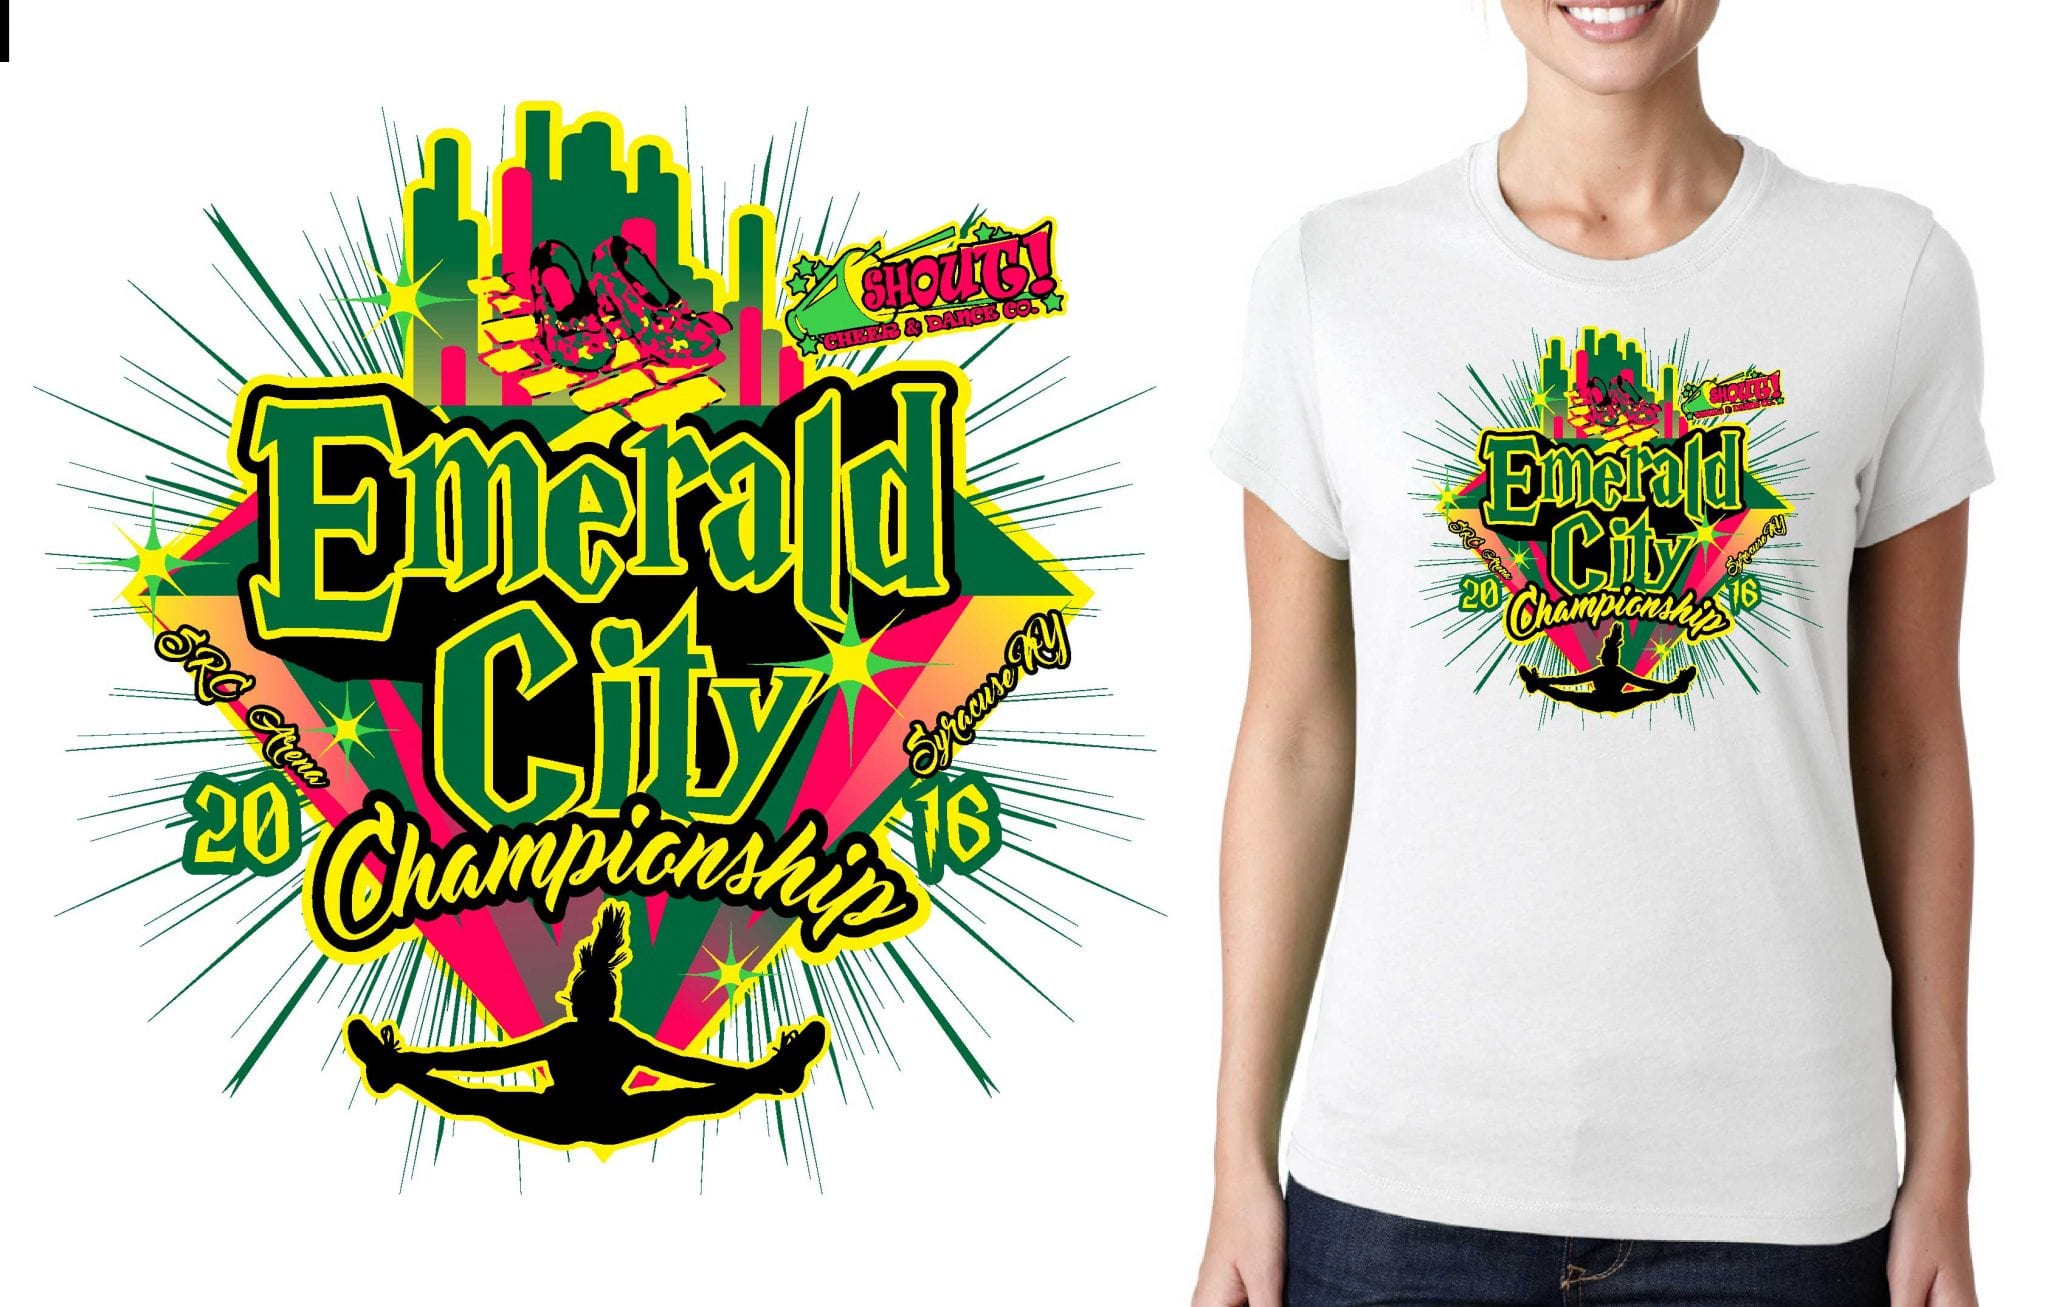 Best cool looking cheer vector logo design for tshirt, 2016 Emerald City Championship